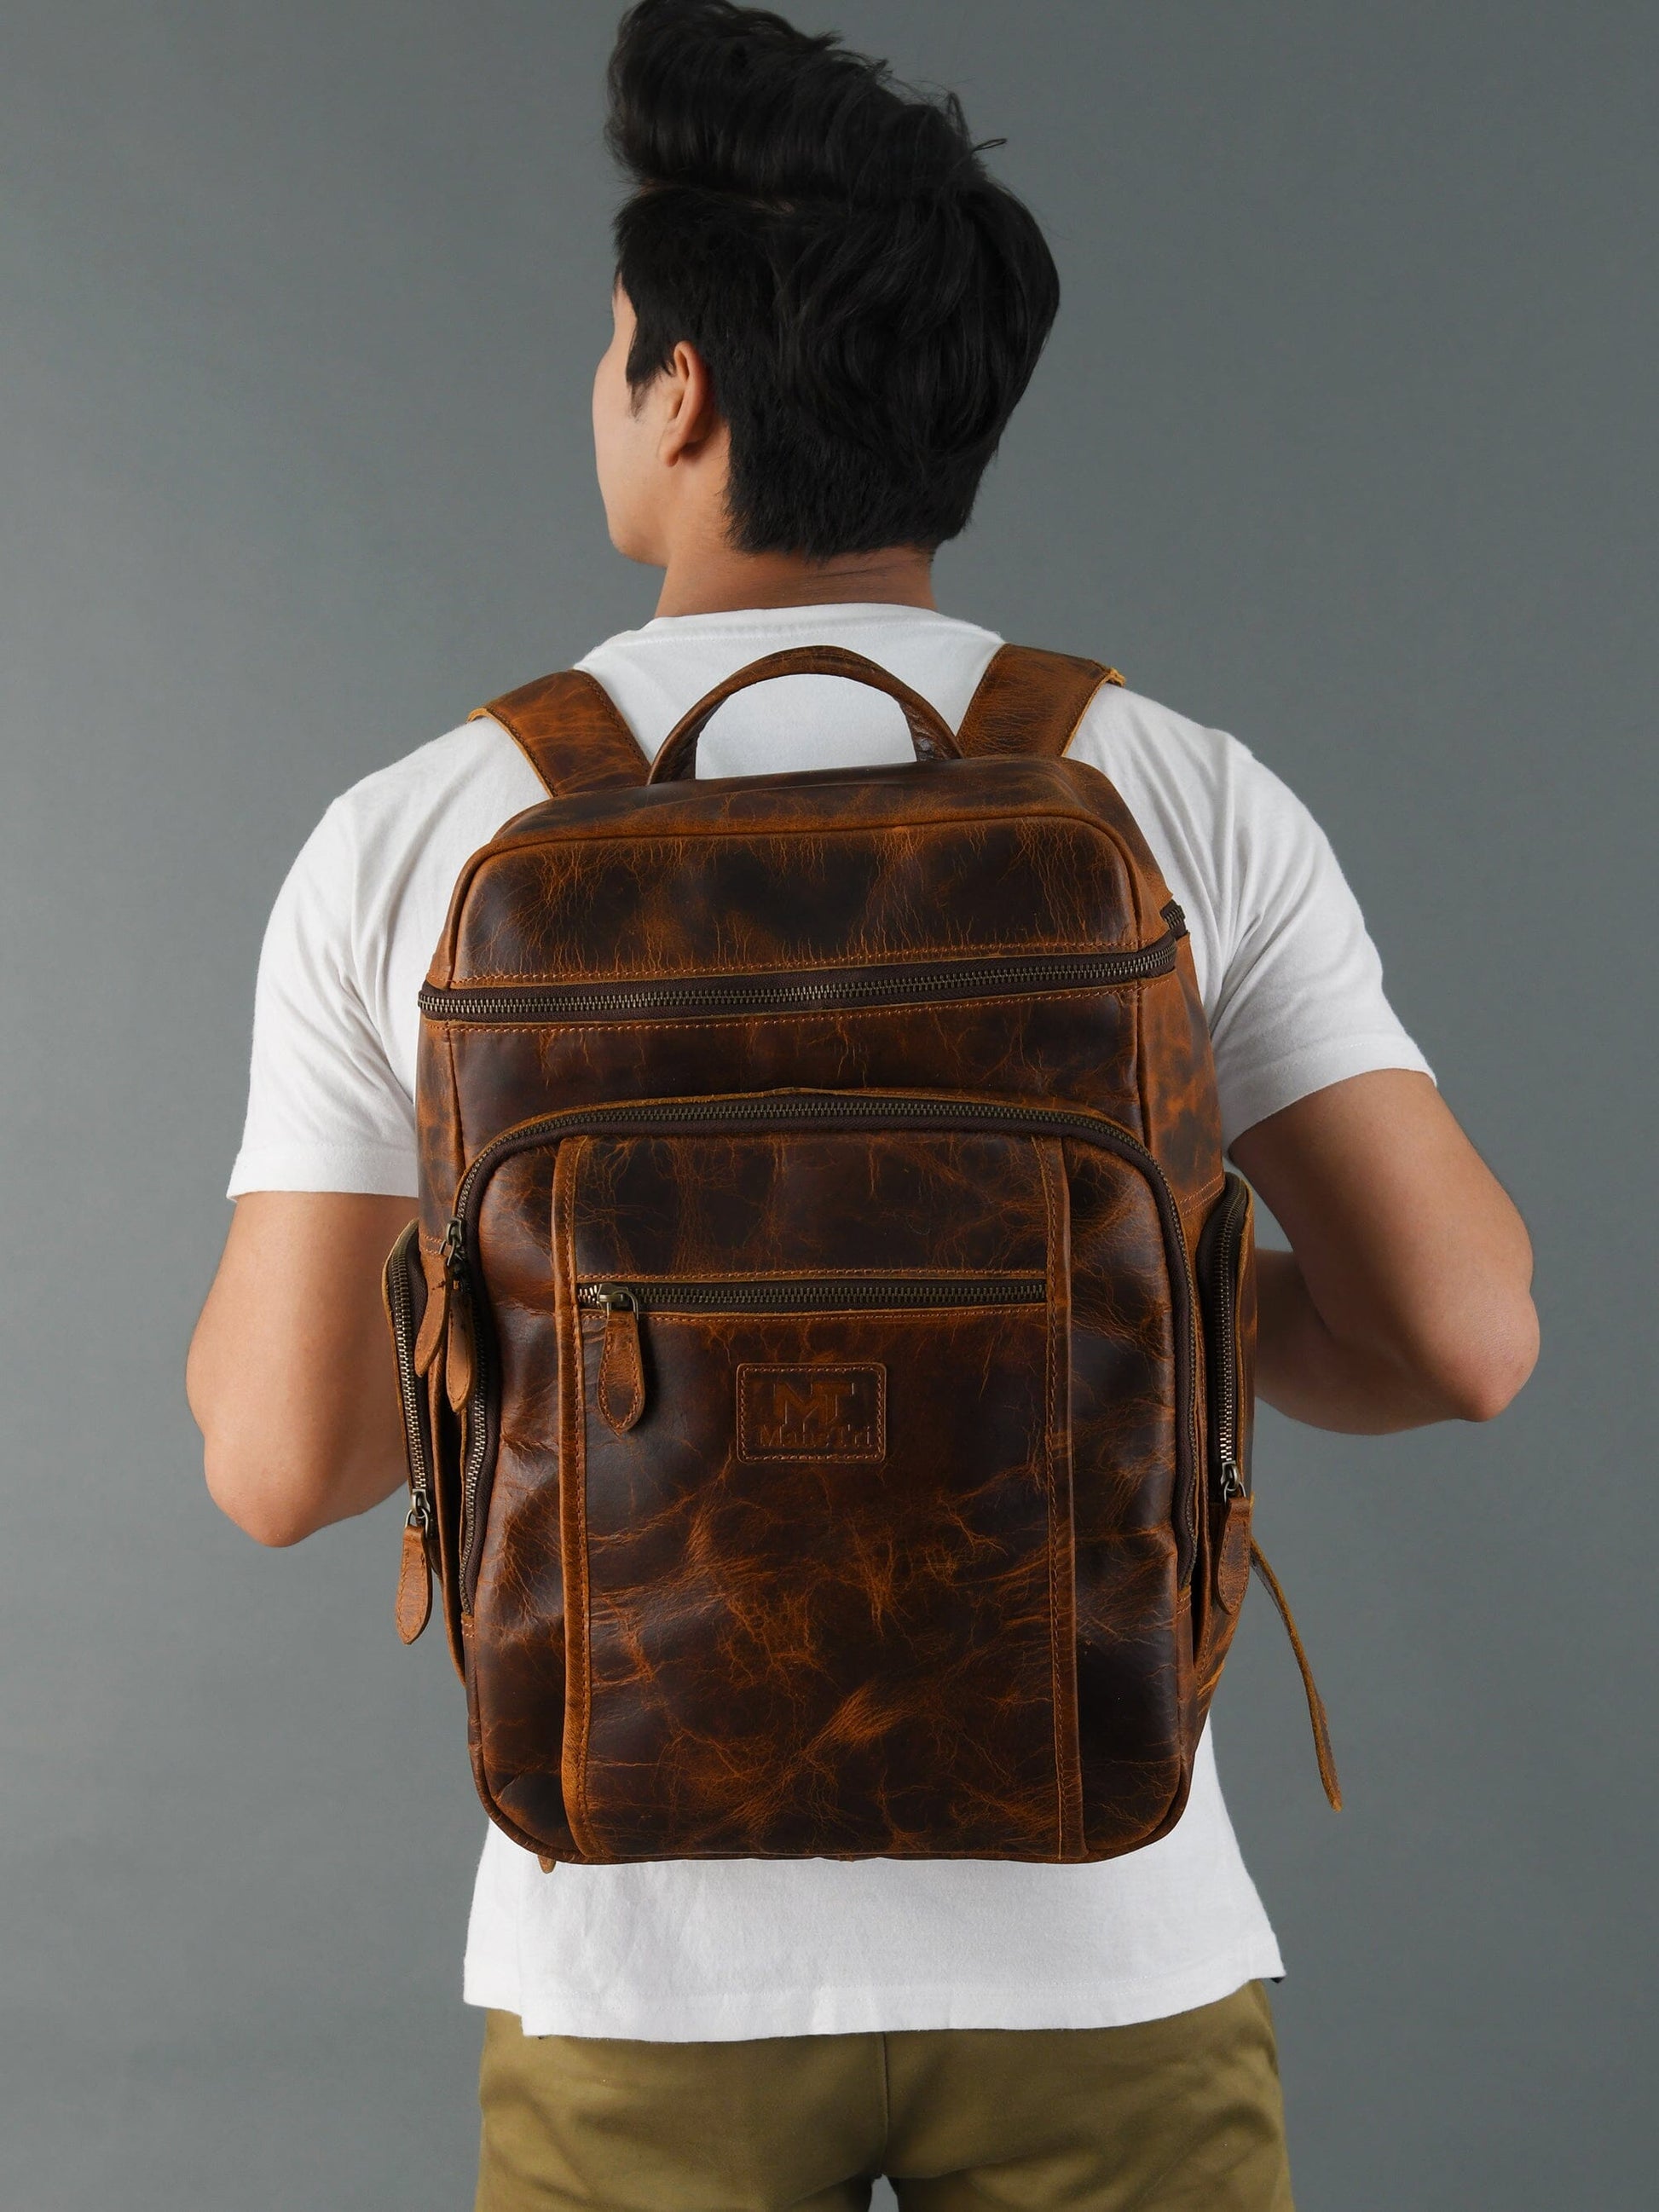 BOGO: Alpha Caramel Buffalo Leather Travel Backpack + FREE Leather Journal - The Tool Store